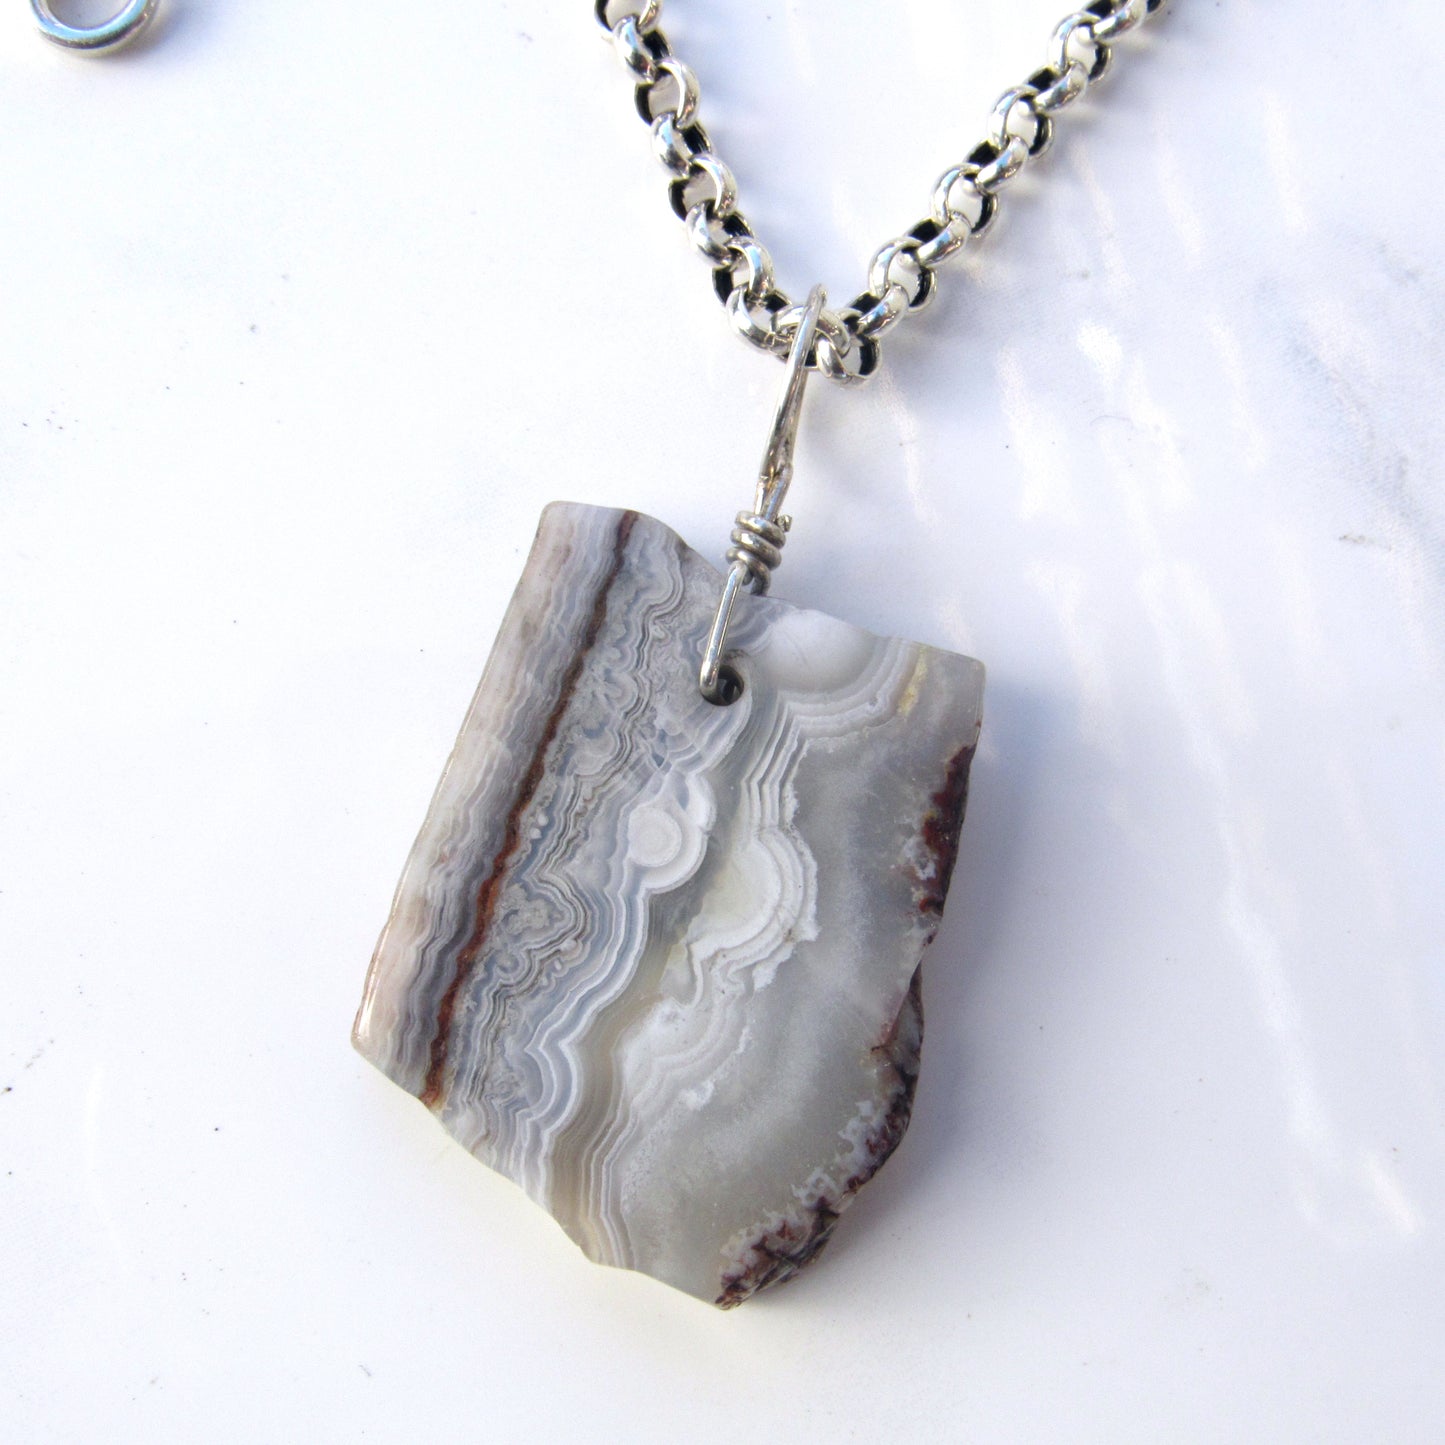 Crazy Lace Agate gemstone on Sterling Silver Chain